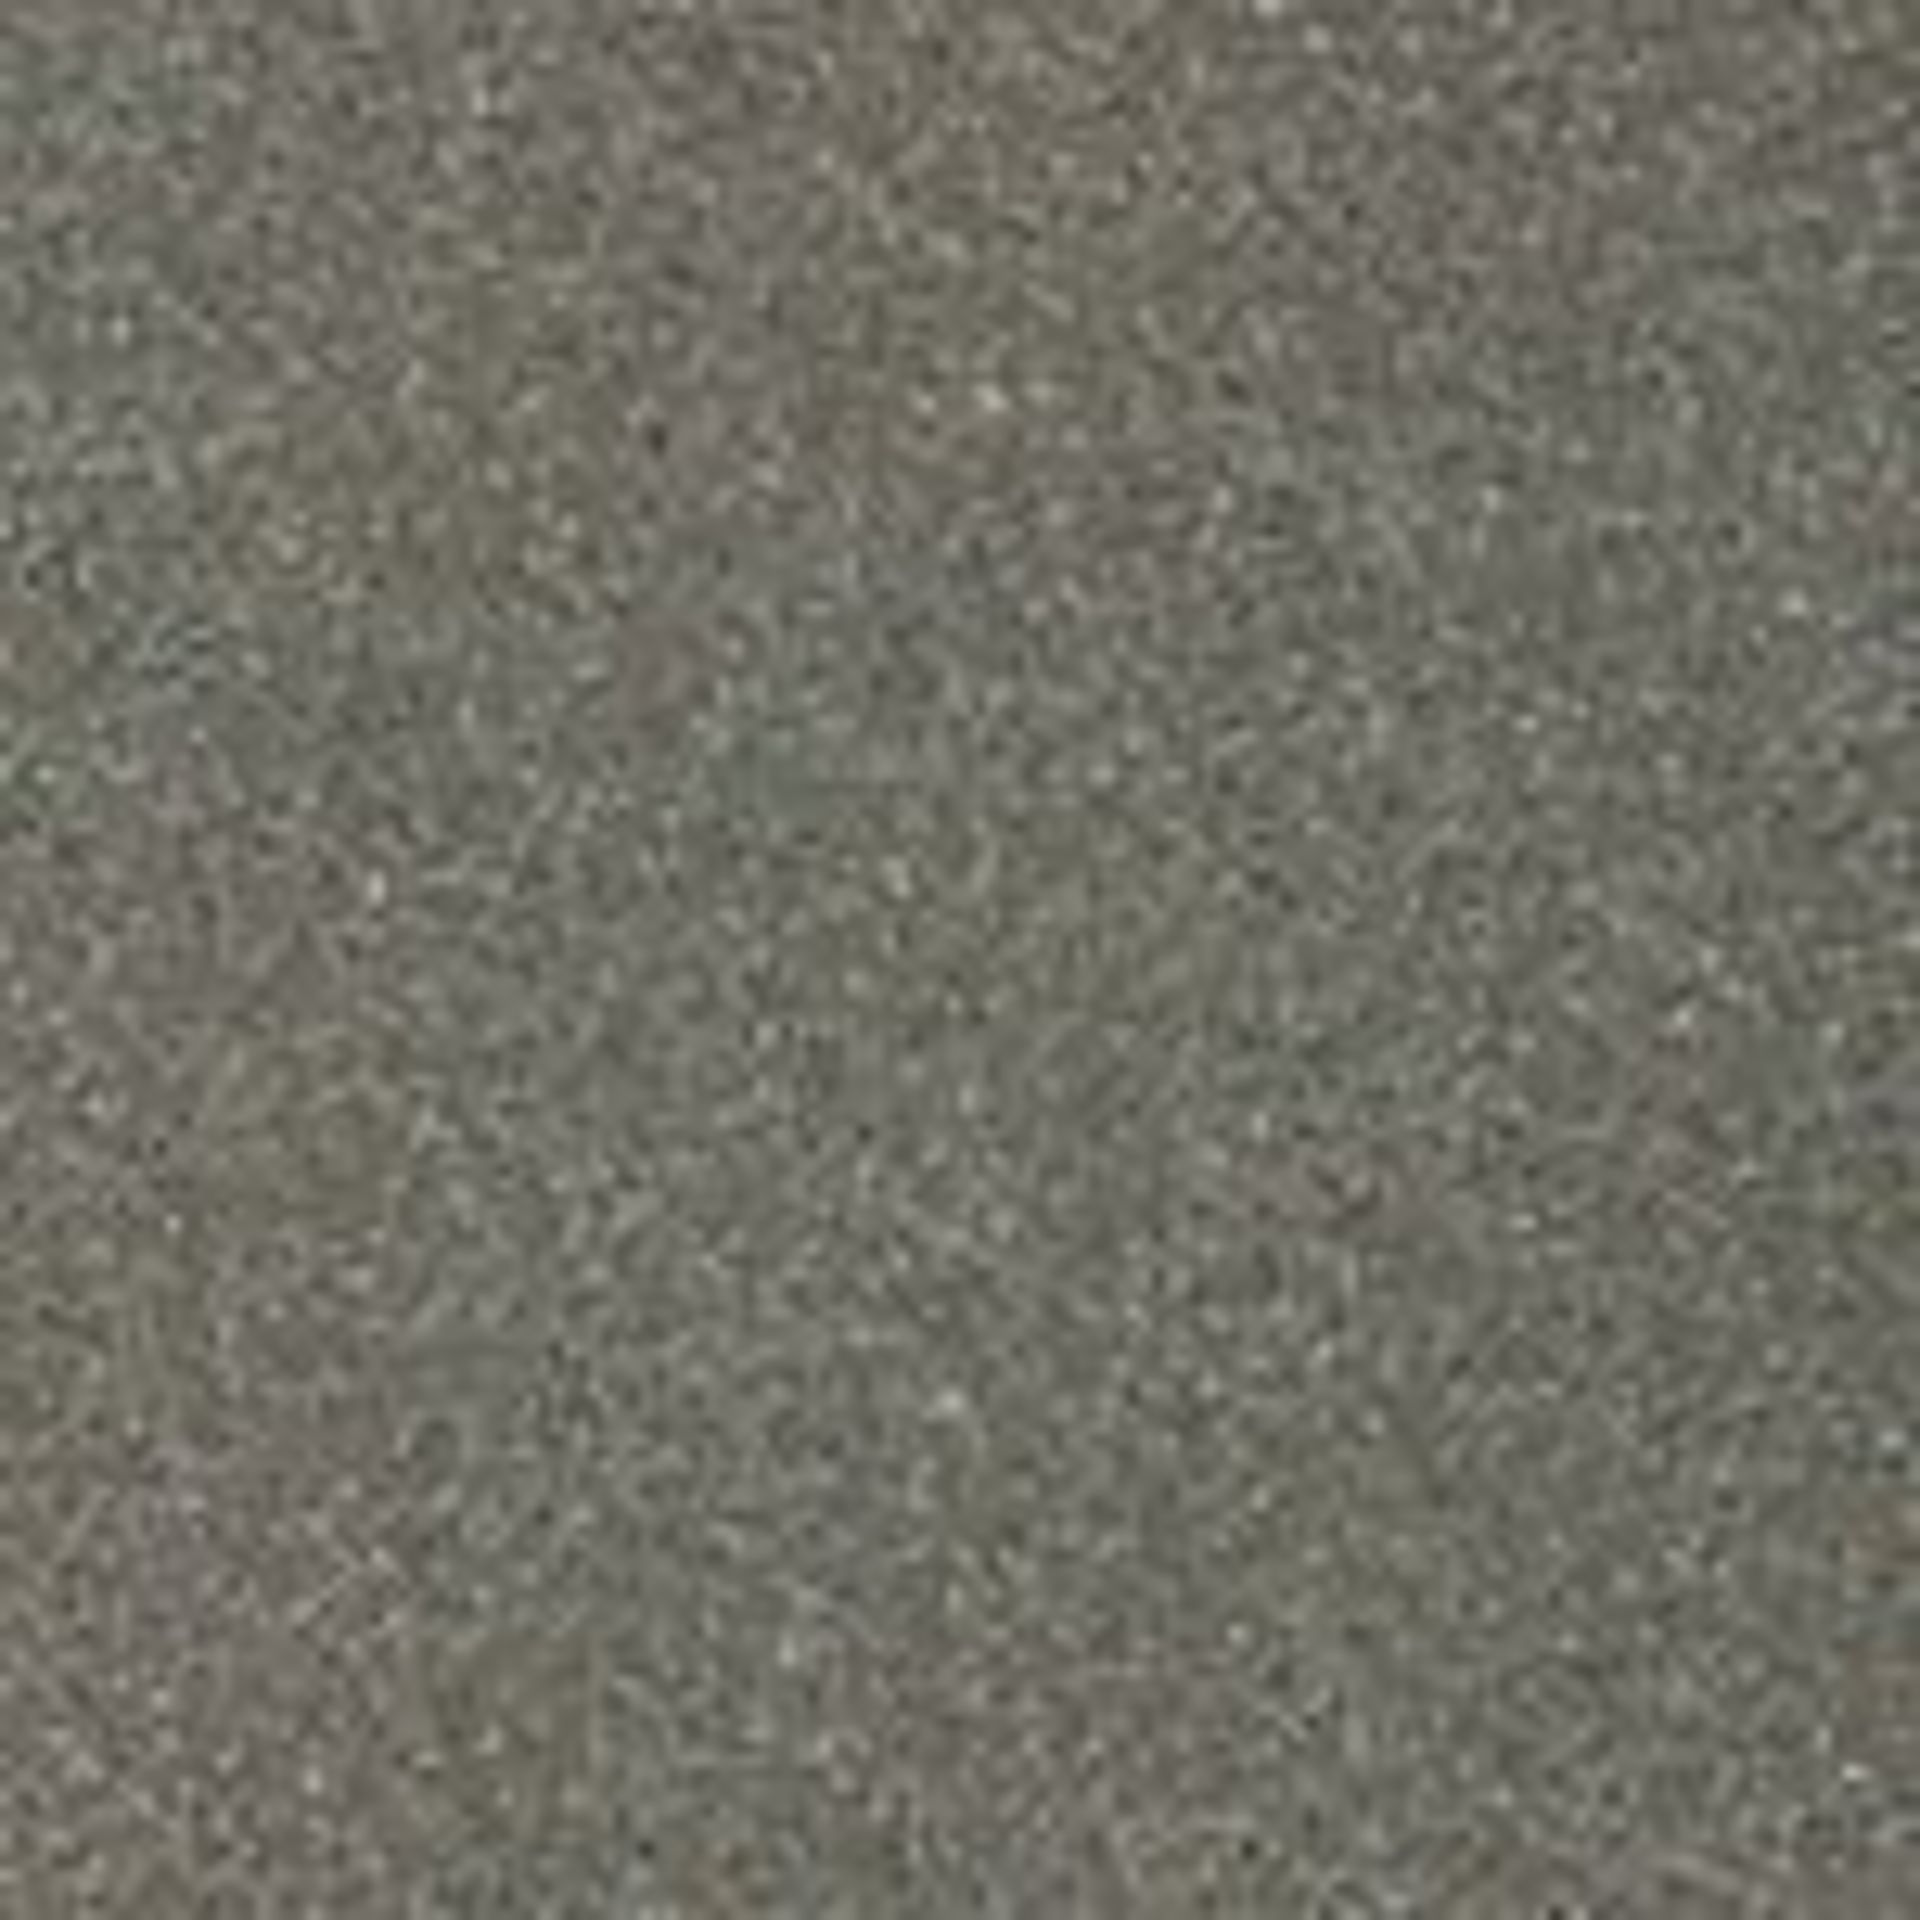 Altro Suprema - Tundra A stunning, non-sparkle safety floor that gives you complete design